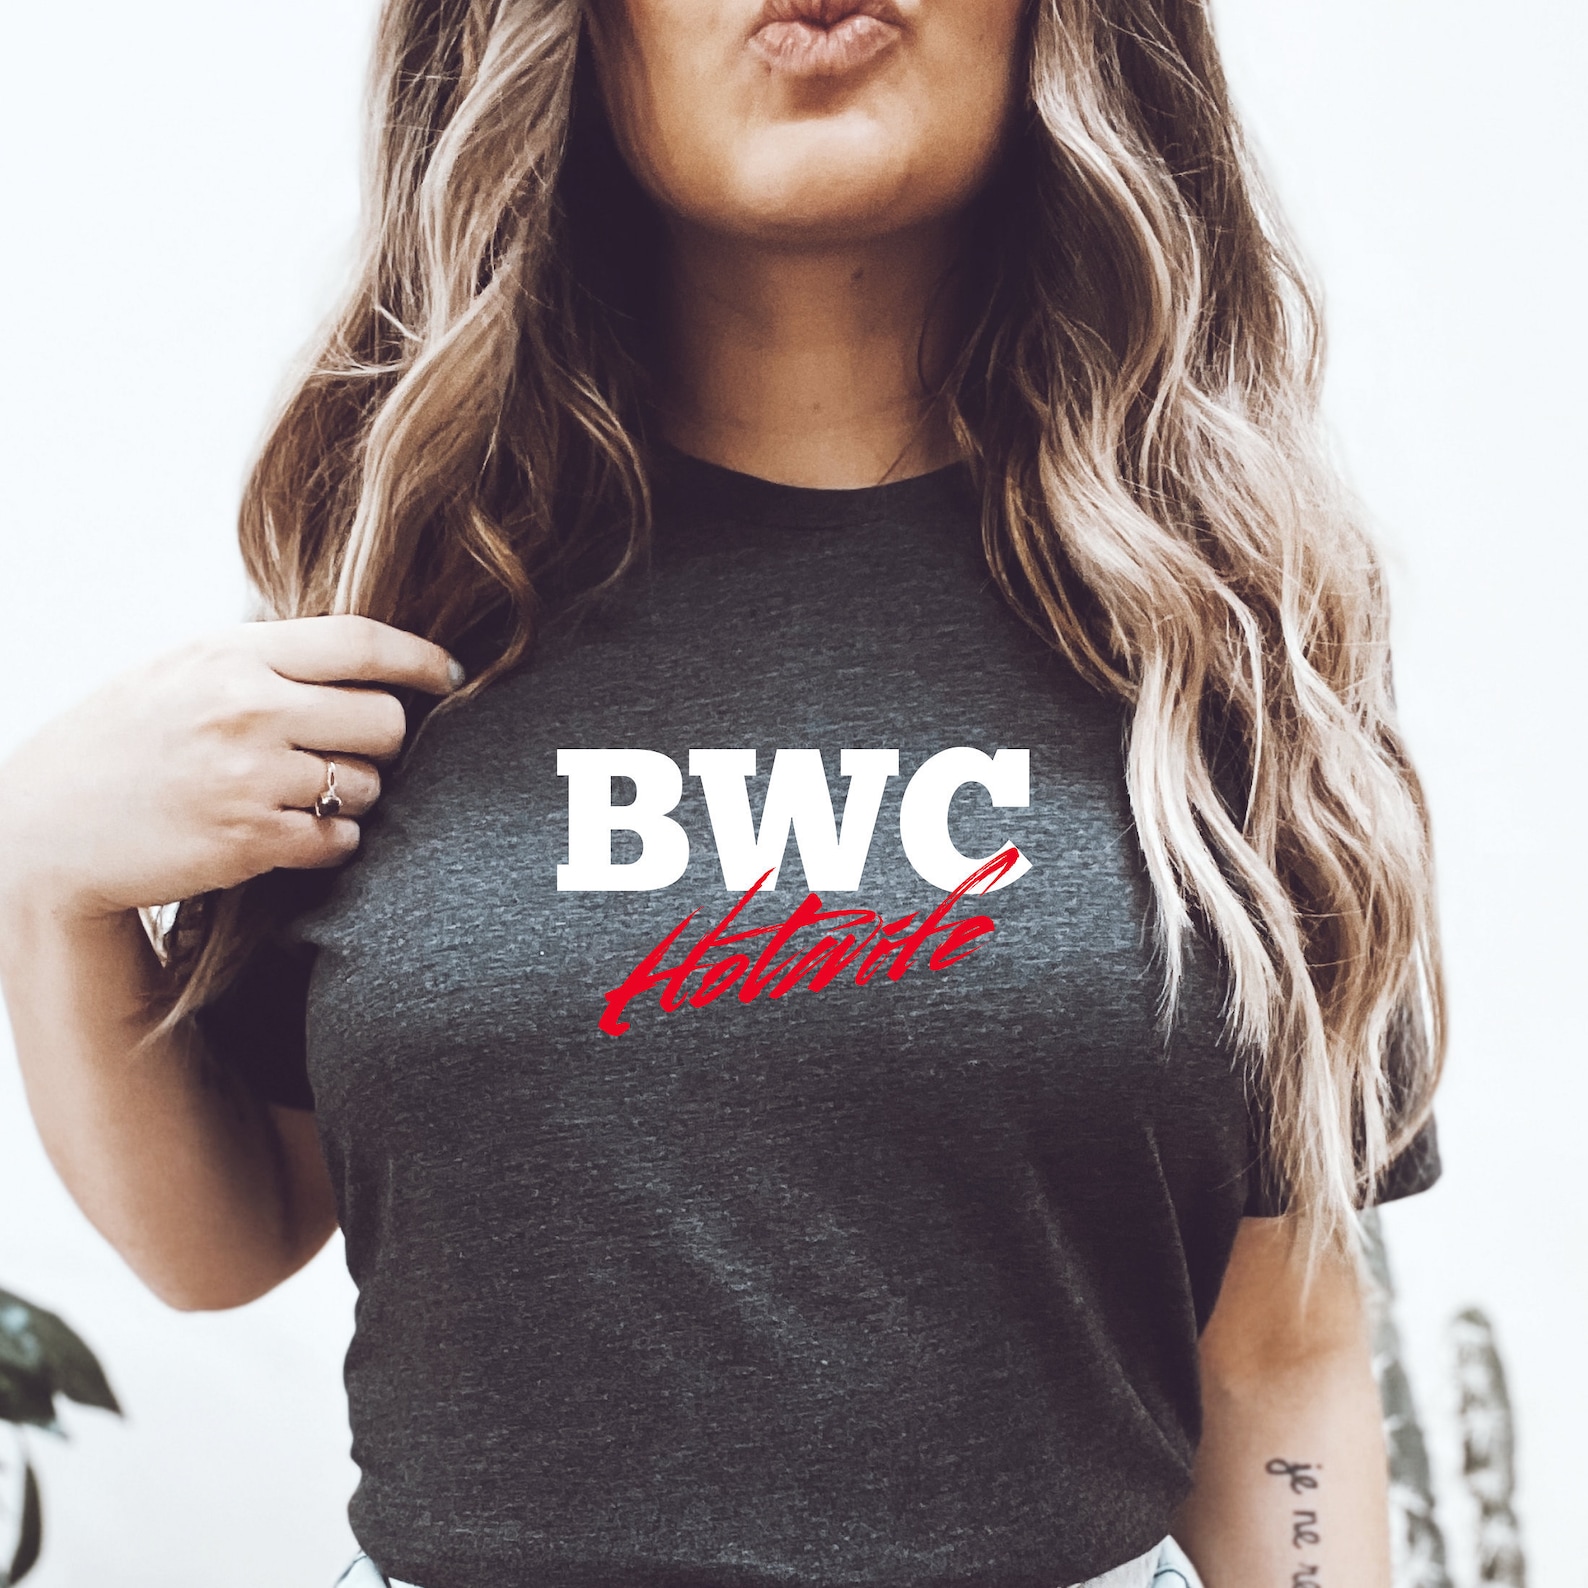 BWC Hotwife/hotwife/Sexy gifts for him/wife of the party Etsy